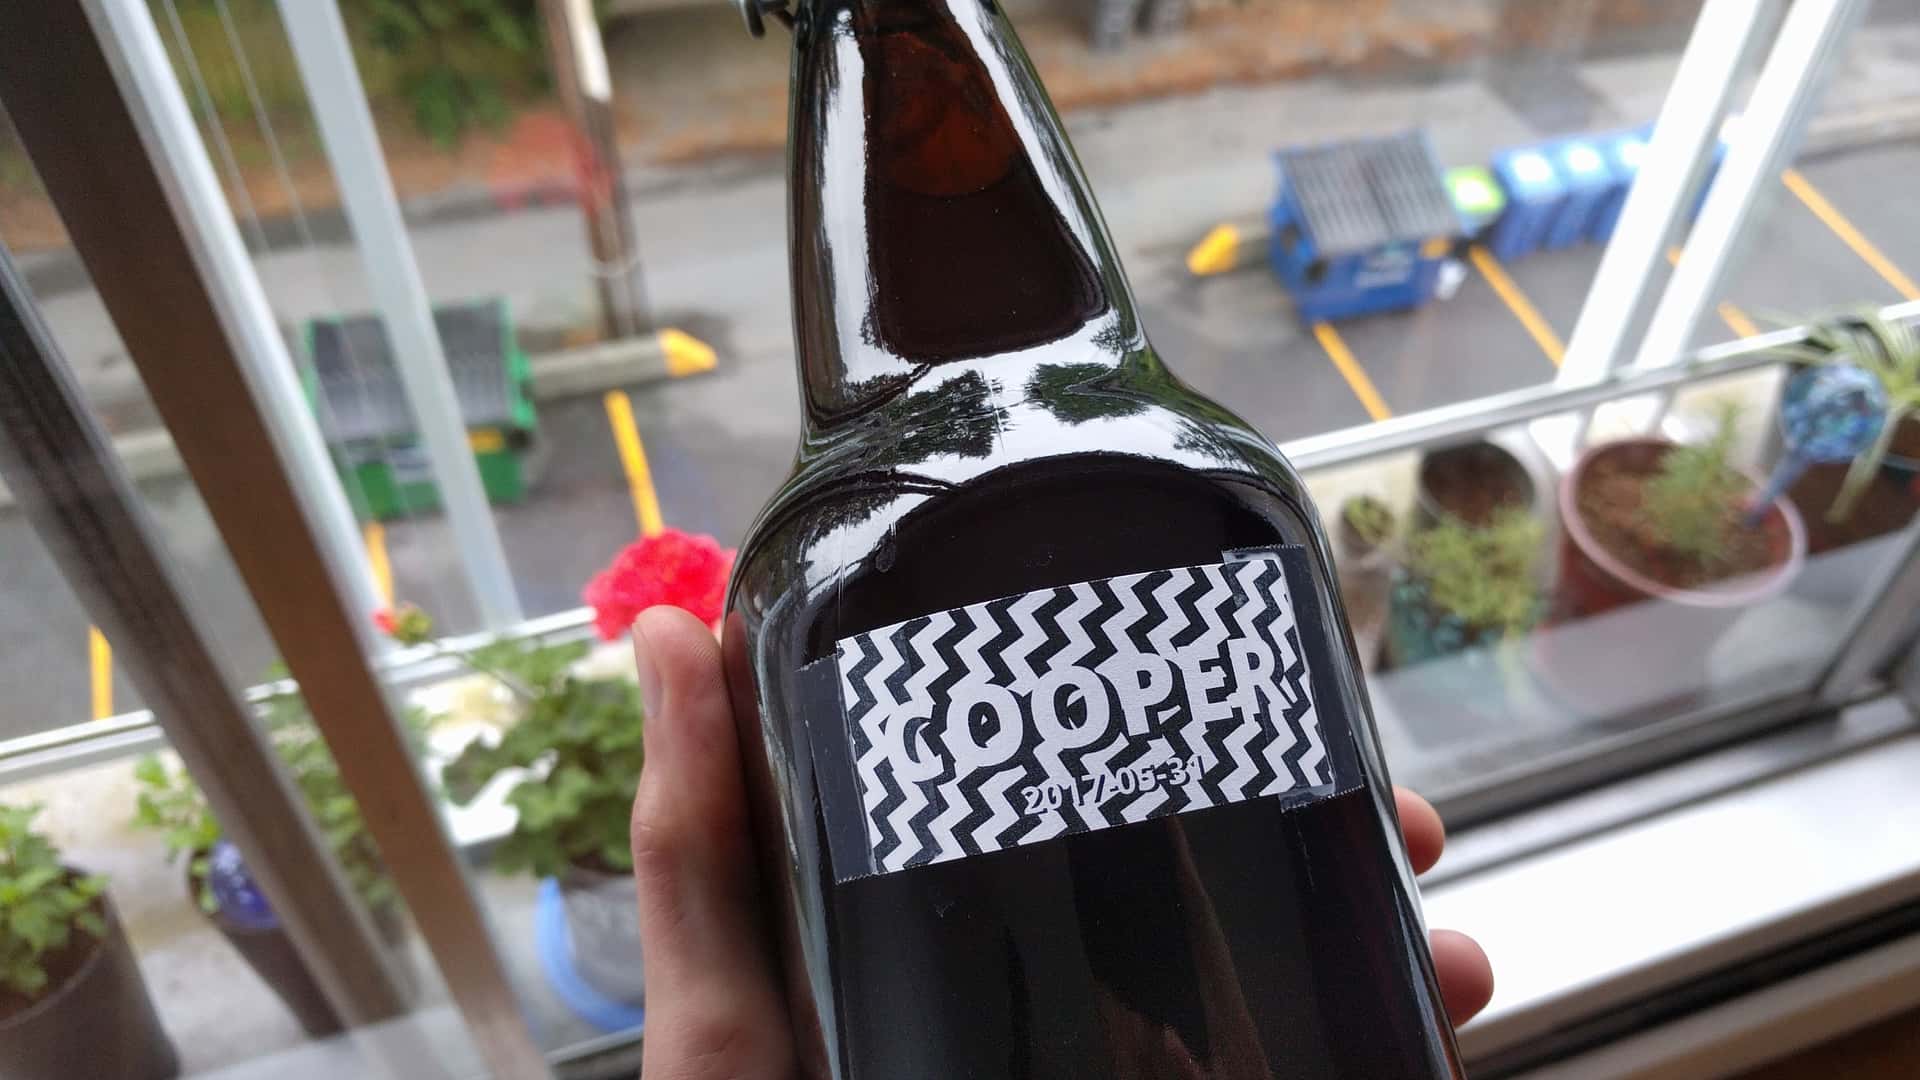 homebrew beer labeled with “Cooper” and a black and white zigzag pattern